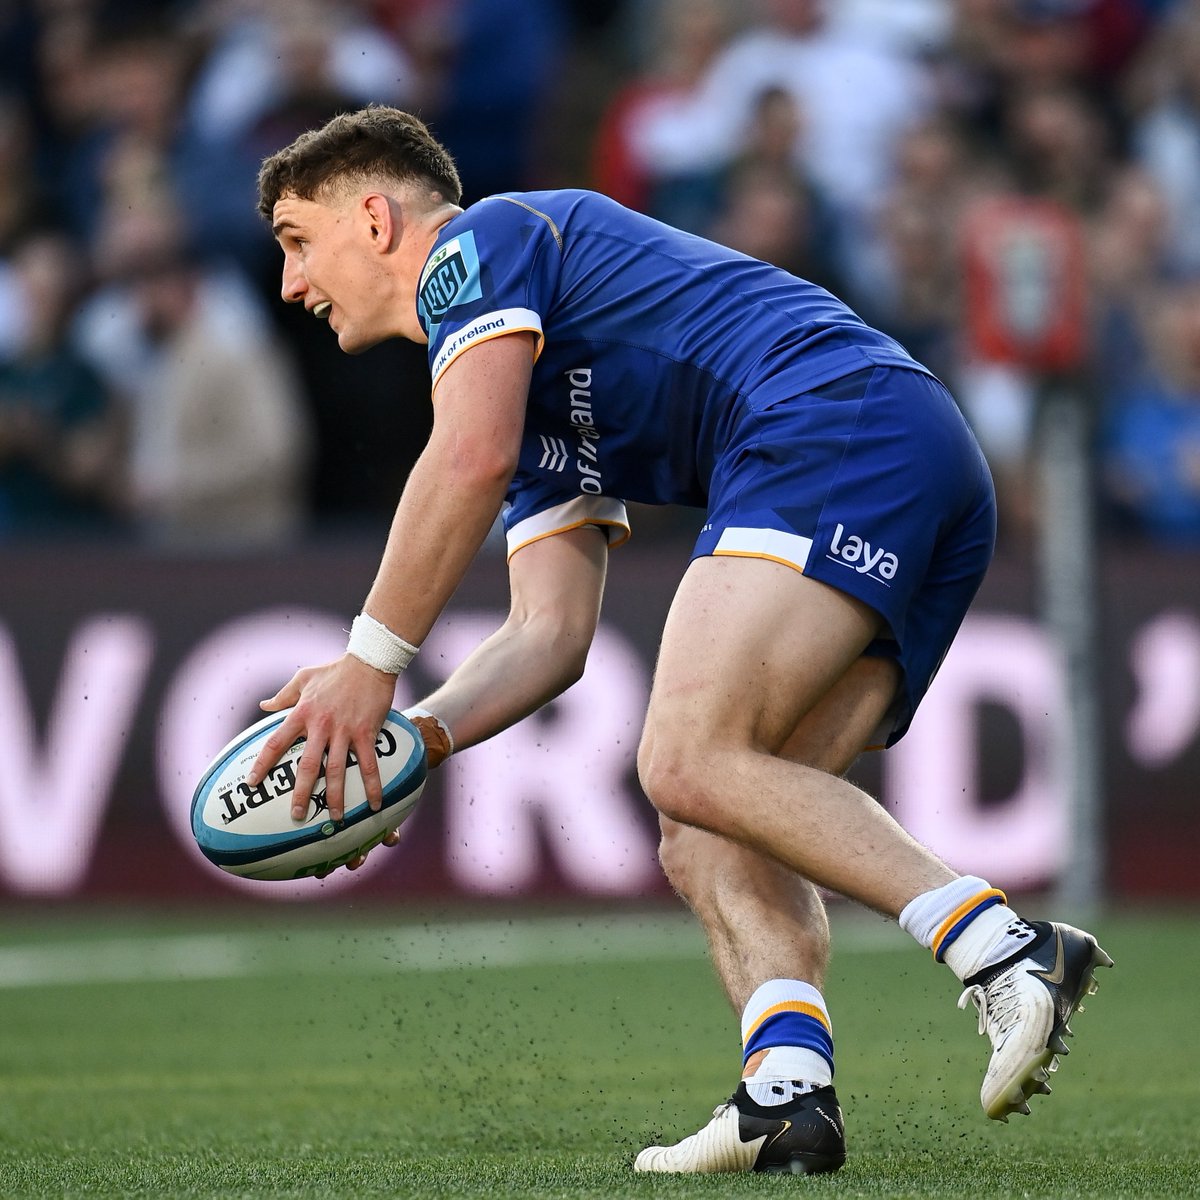 𝗧𝗵𝗲 𝘁𝗿𝘆 𝘀𝗰𝗼𝗿𝗲𝗿𝘀 🔥🔥 Charlie Ngatai and Cormac Foley both touched down under the posts in the opening 40 to give Leinster Rugby a 14-10 lead over Ulster at the break. A big second half coming up. 😤 #ULSvLEI #FromTheGroundUp